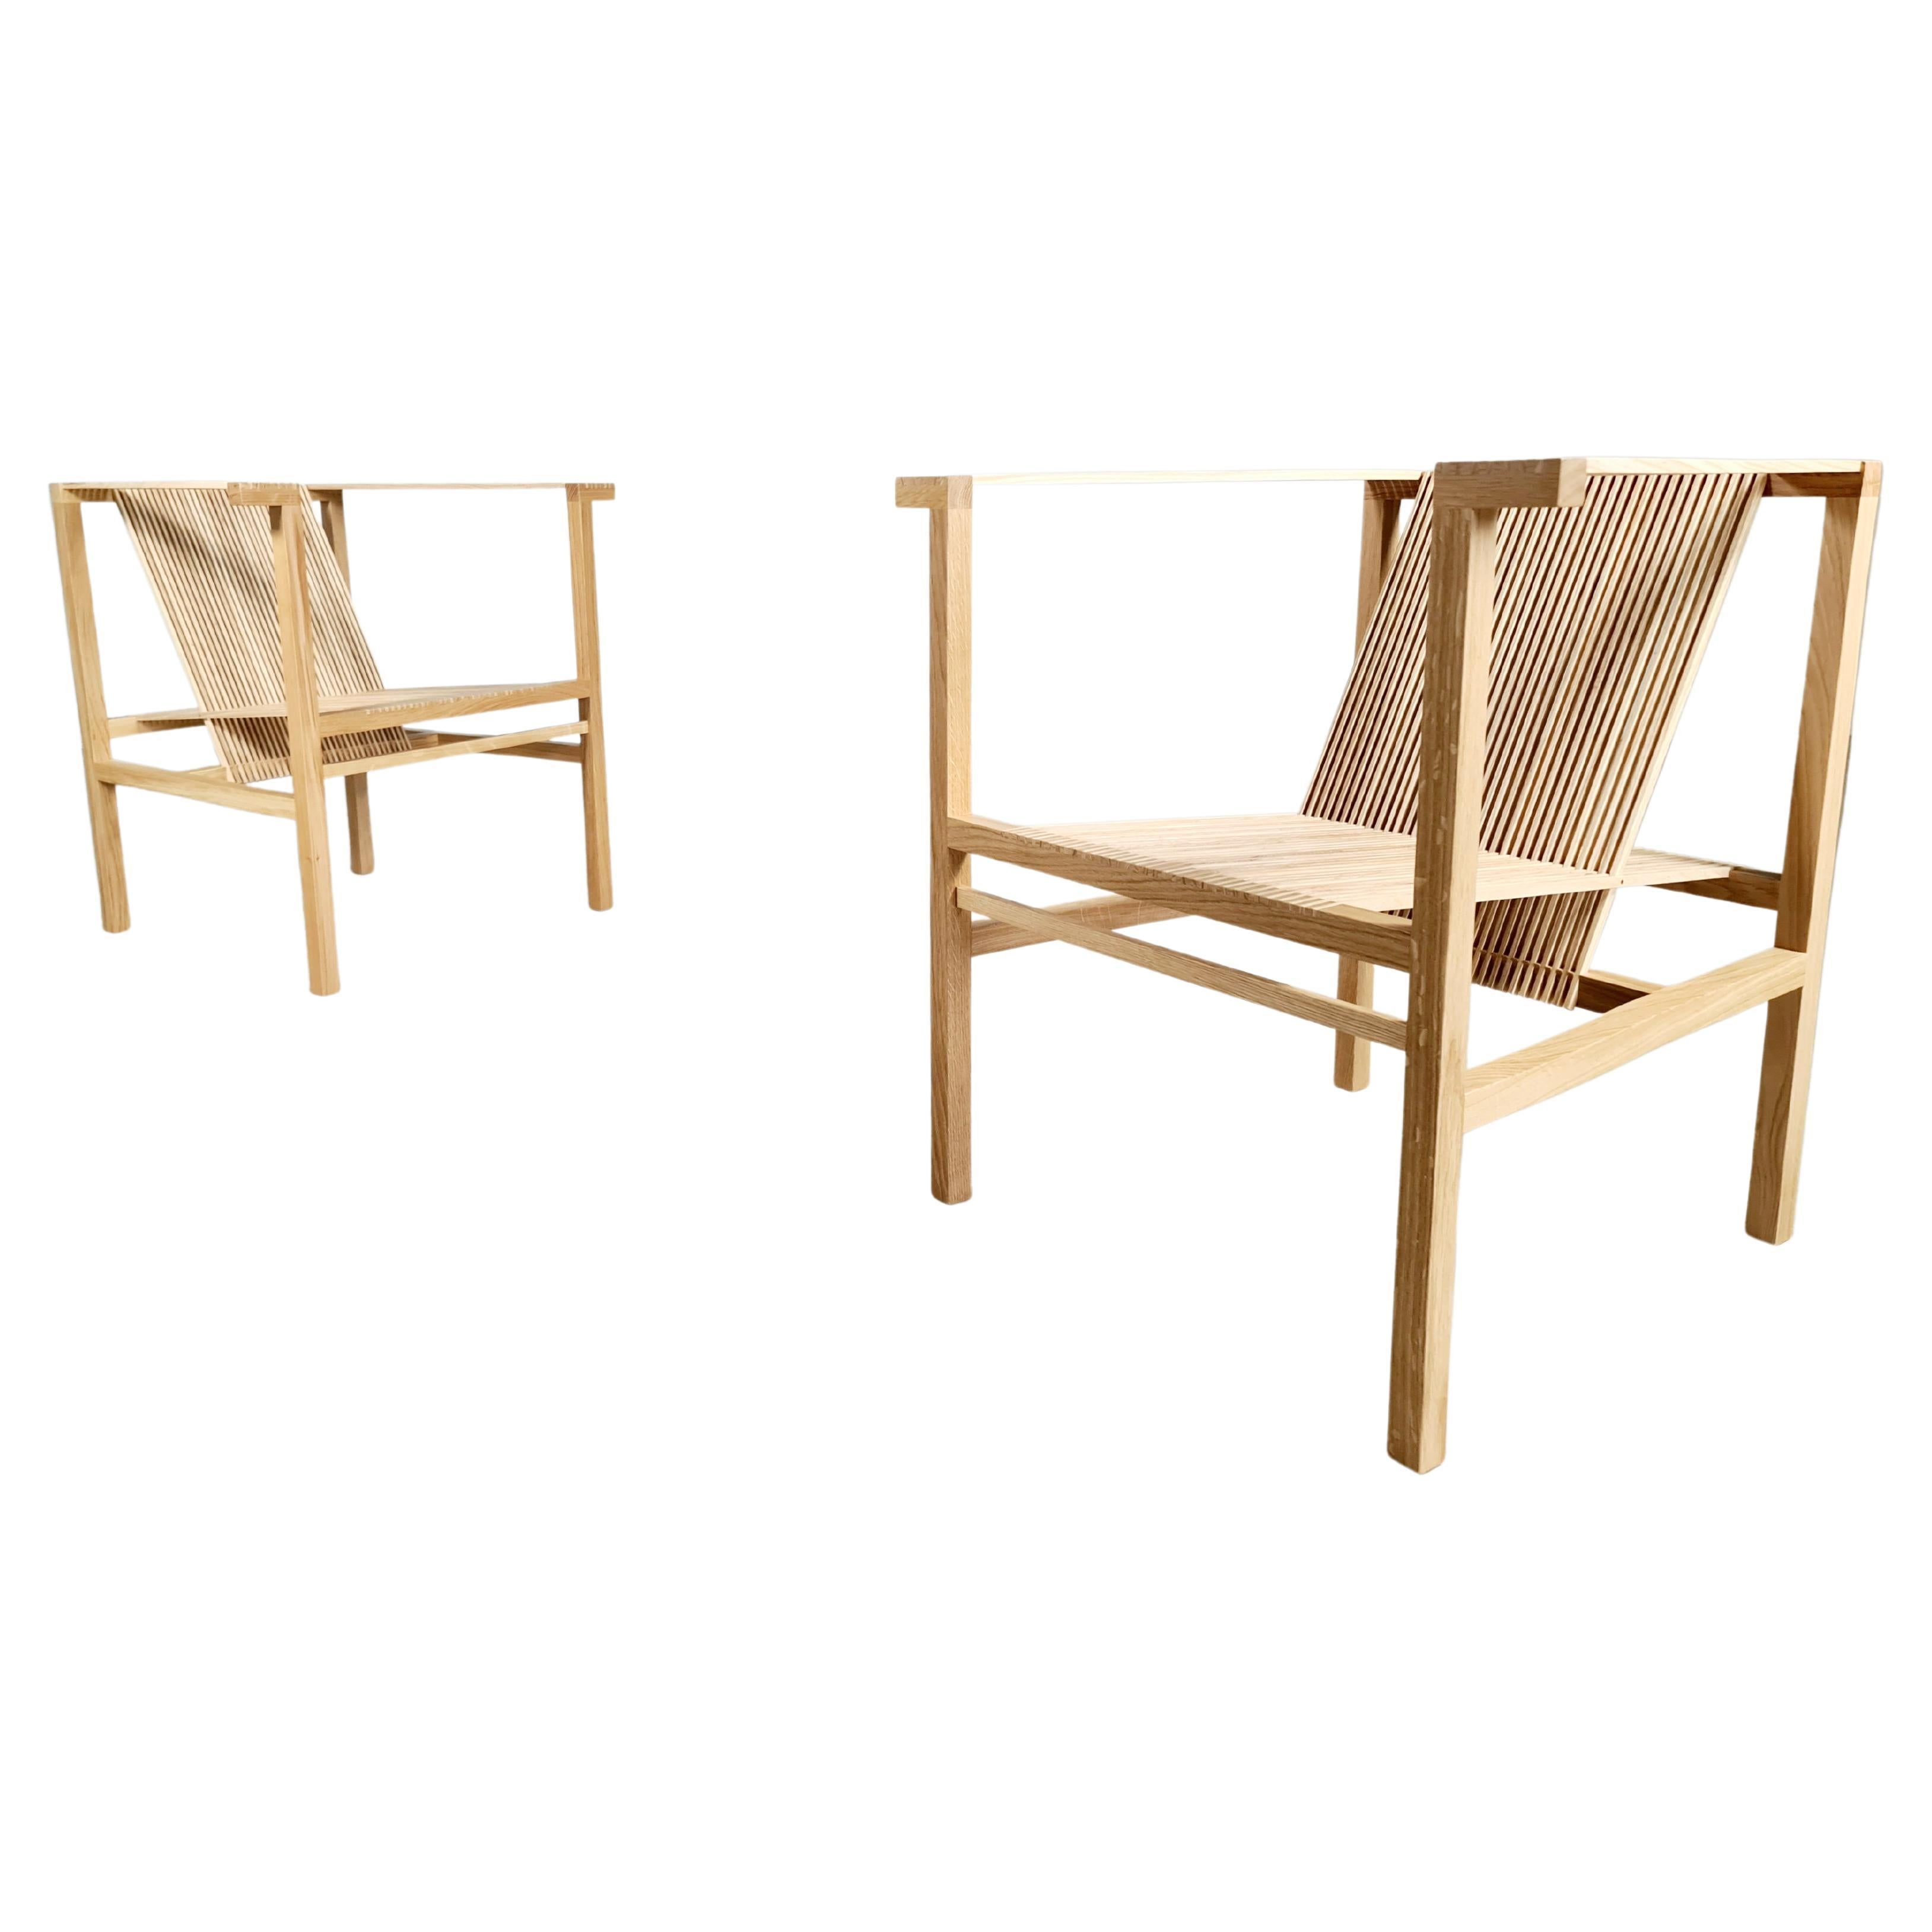 Ruud-Jan Kokke Slat Chair 'fauteuil 21', the Netherlands For Sale